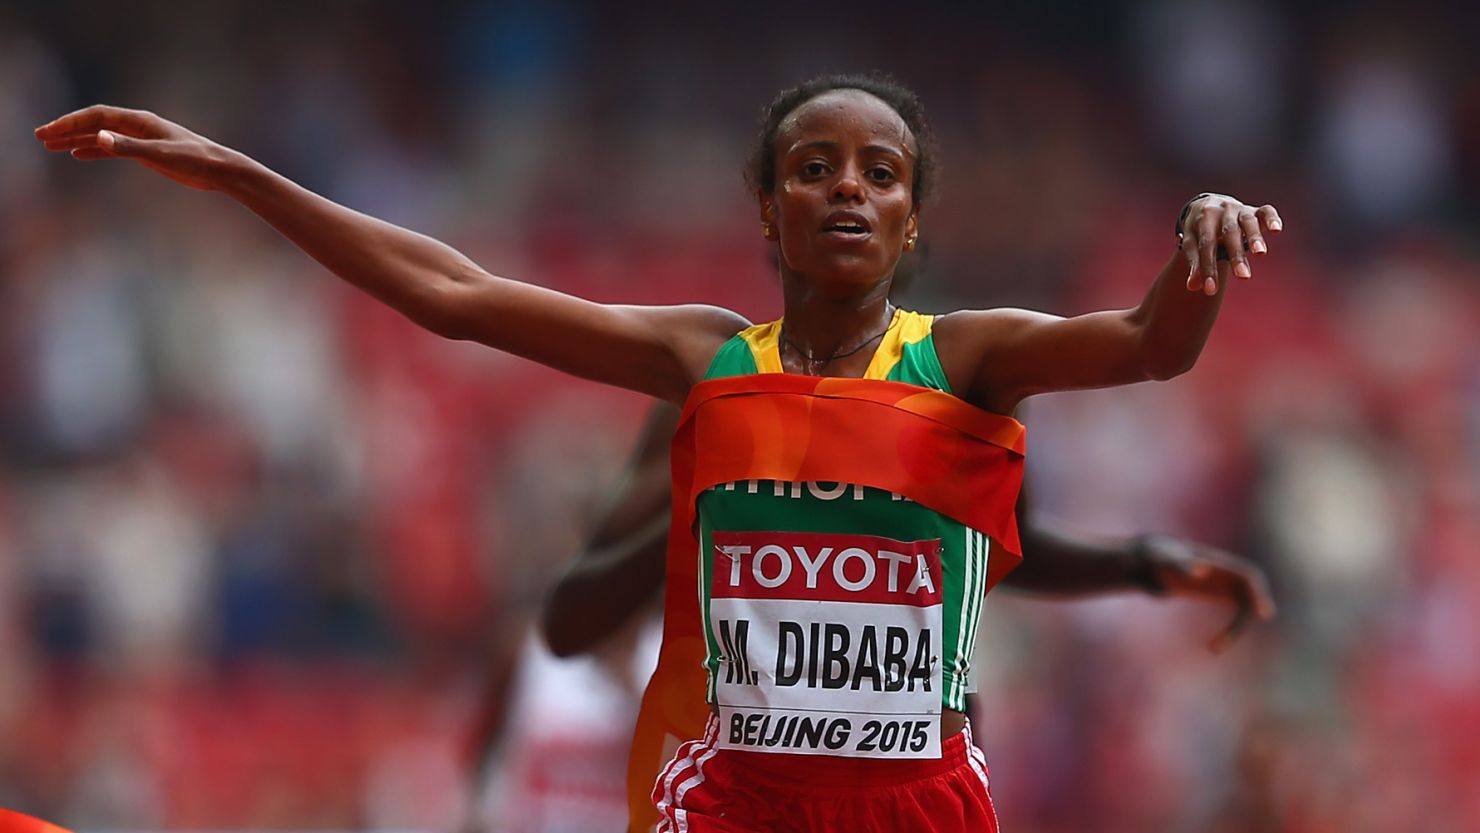 Mare Dibaba of Ethiopia takes gold in the women's marathon after a sprint finish in the Bird's Nest Stadium.
